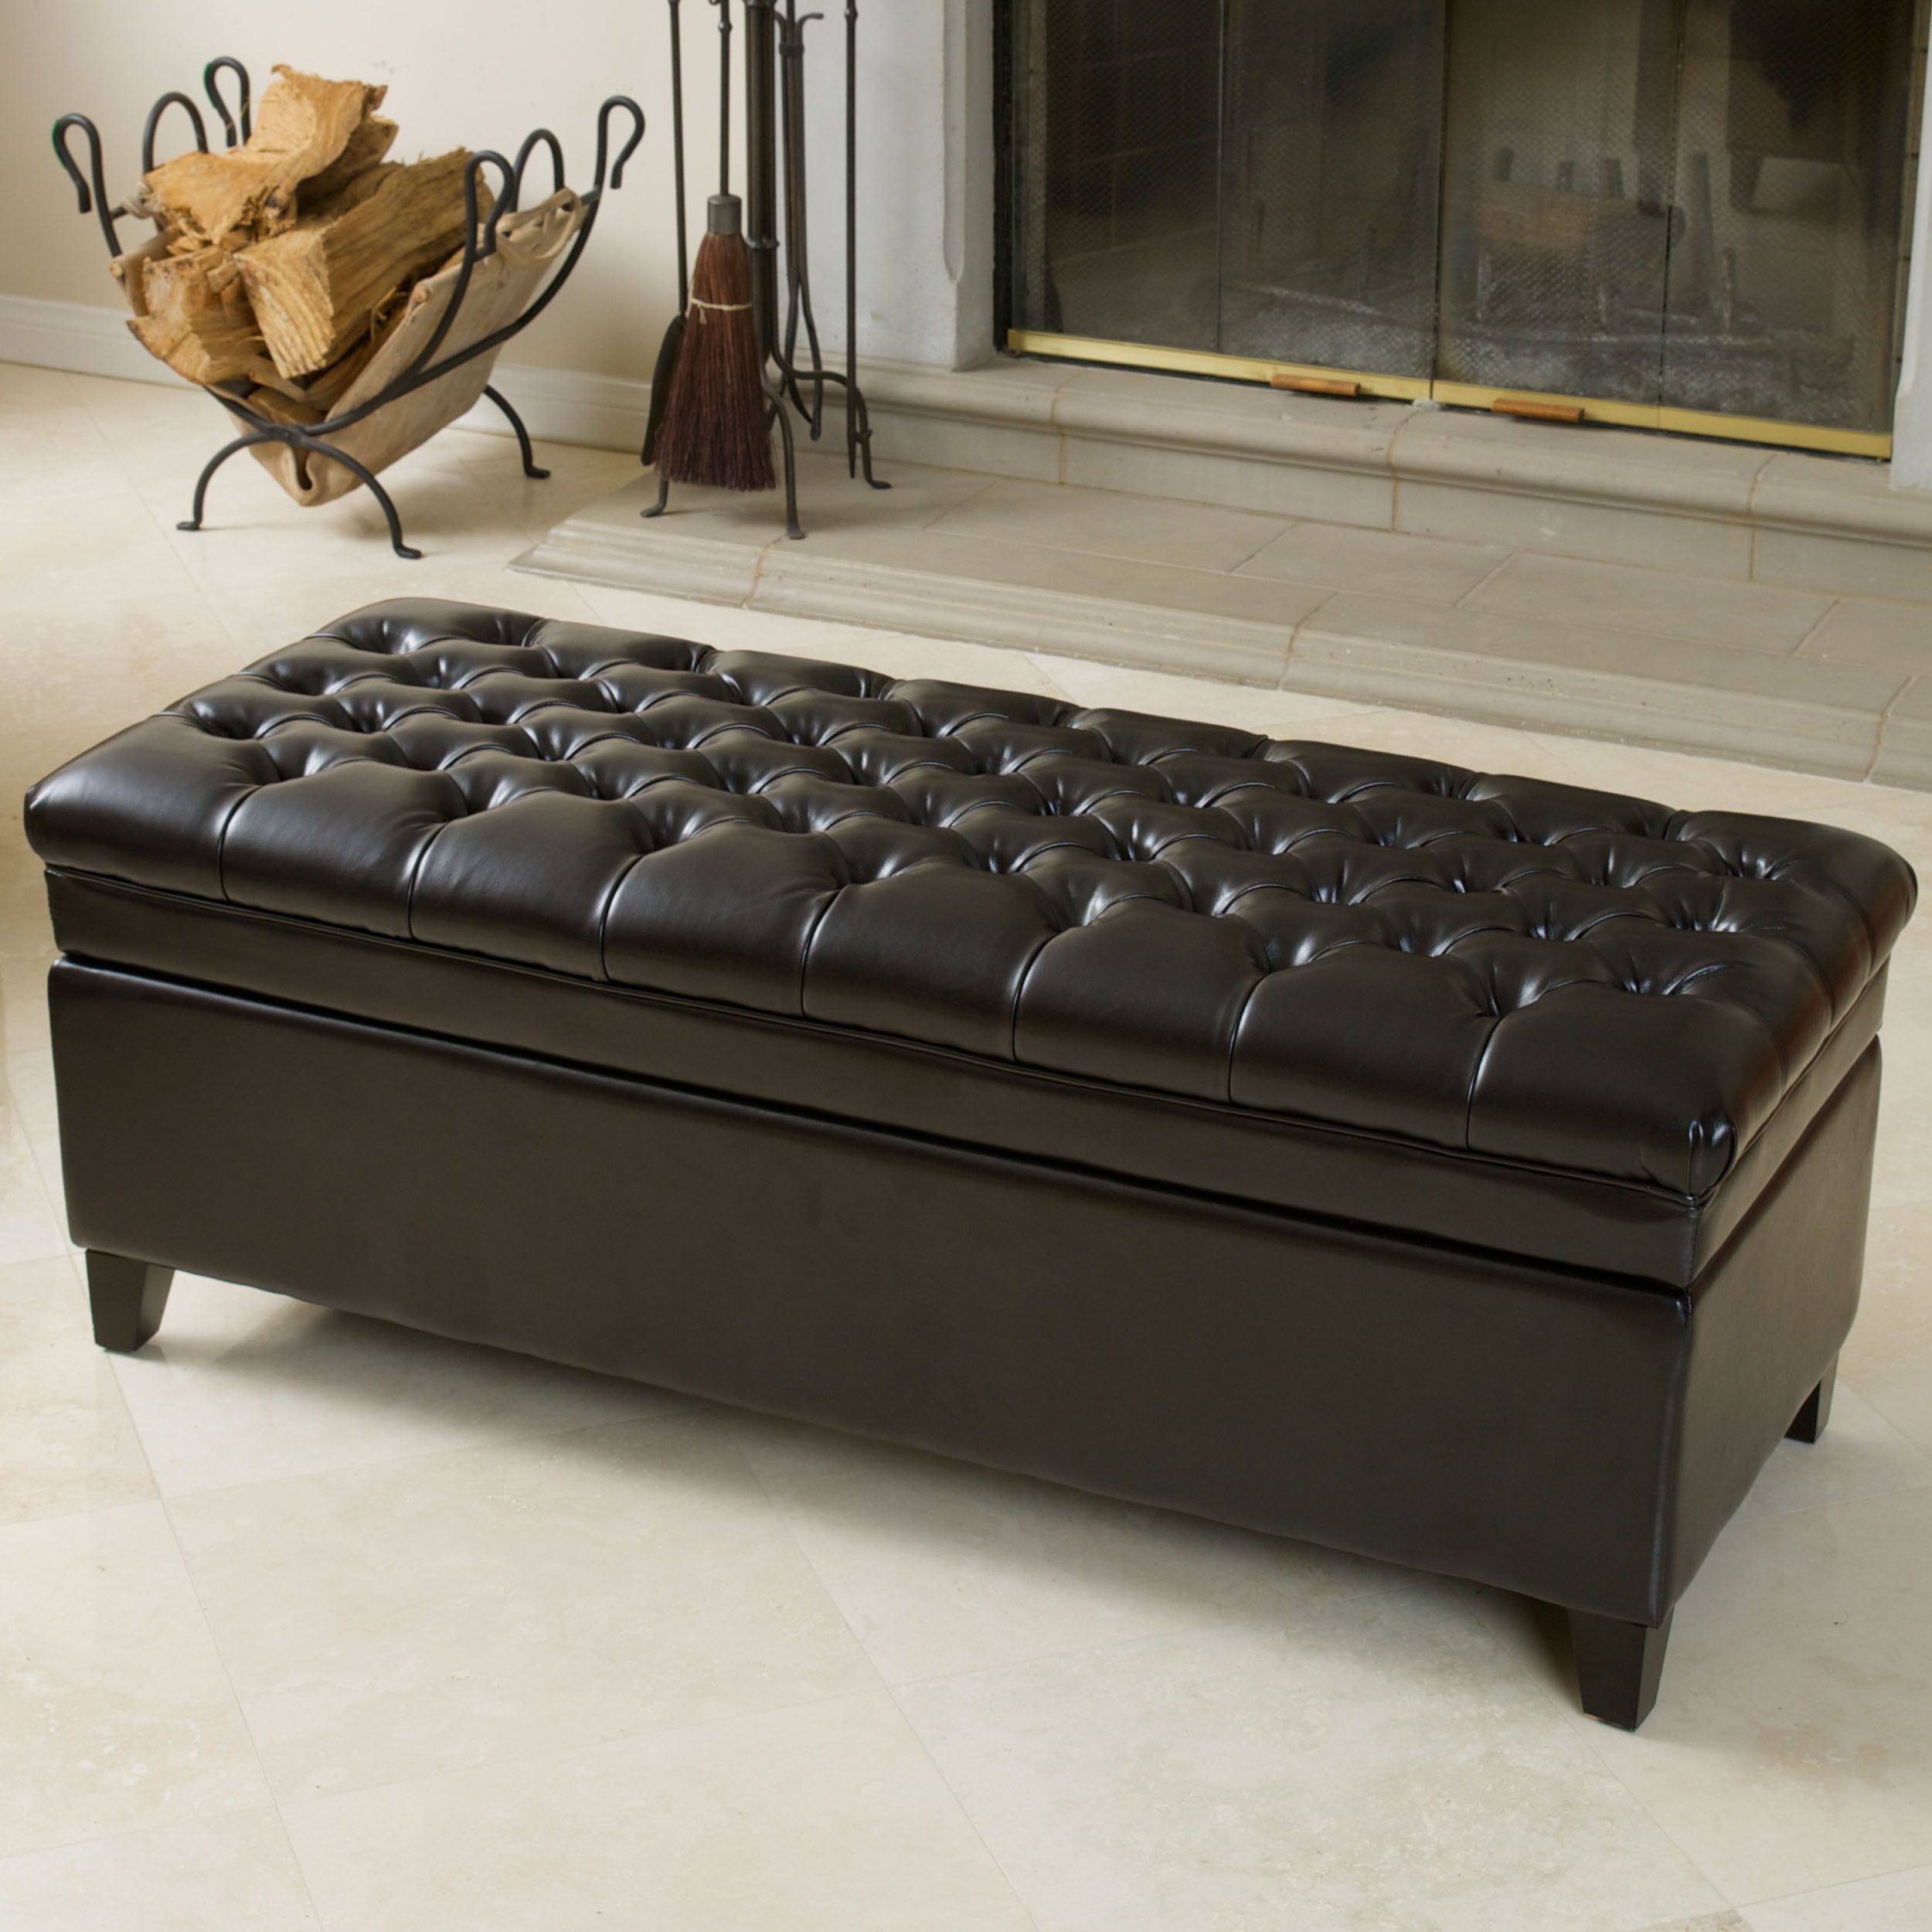 Bennette Tufted Espresso Brown Leather Storage Ottoman – Walmart For Brown Tufted Pouf Ottomans (View 1 of 20)